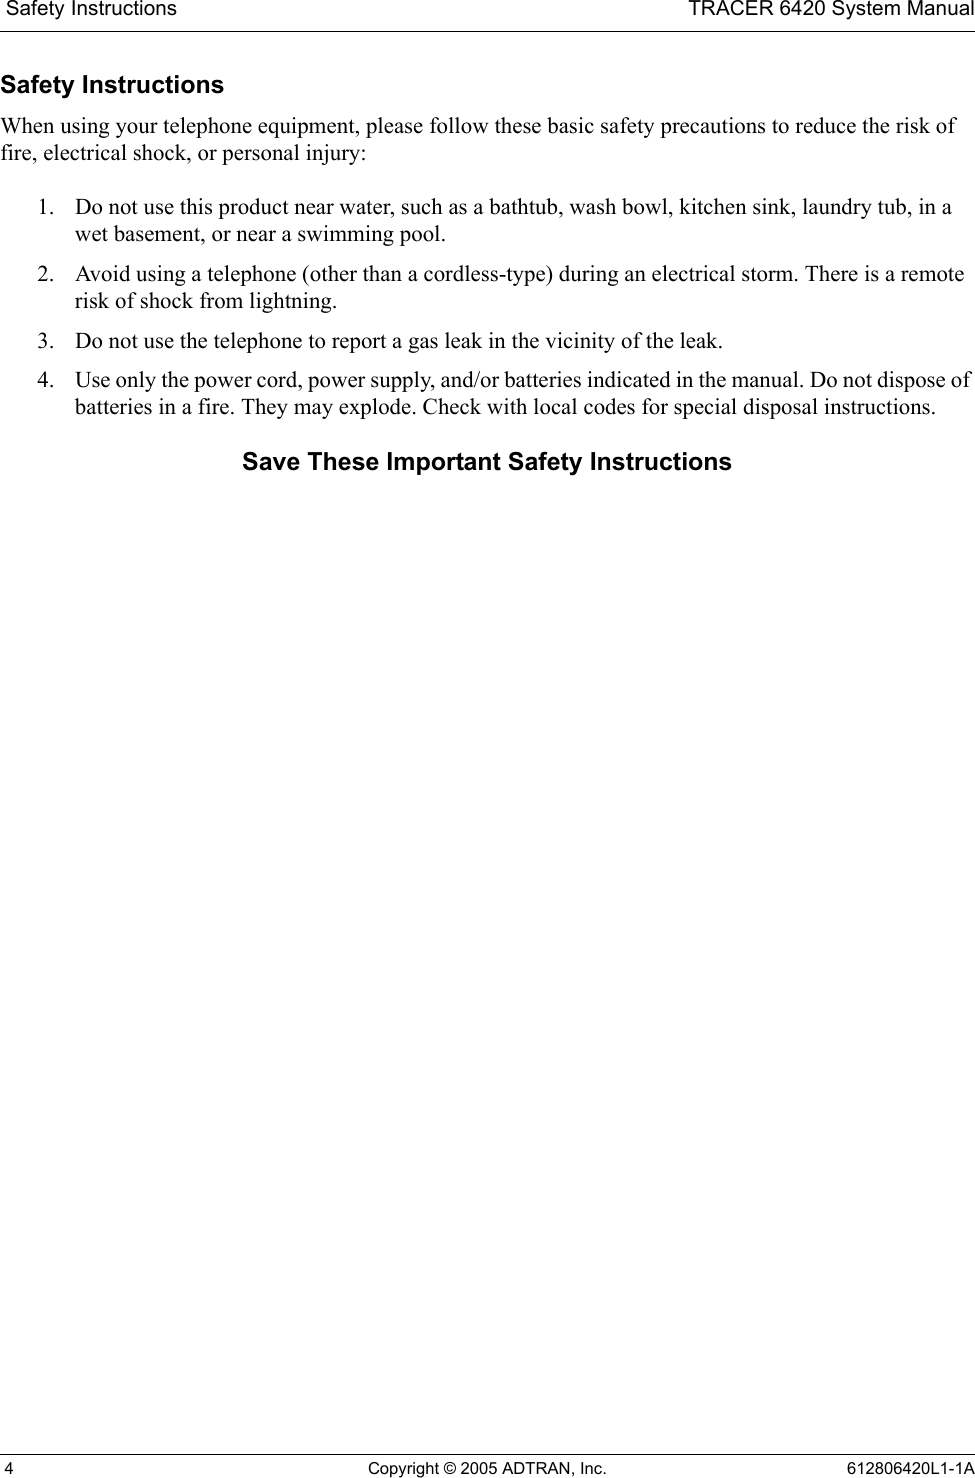  Safety Instructions TRACER 6420 System Manual 4 Copyright © 2005 ADTRAN, Inc. 612806420L1-1ASafety InstructionsWhen using your telephone equipment, please follow these basic safety precautions to reduce the risk of fire, electrical shock, or personal injury:1. Do not use this product near water, such as a bathtub, wash bowl, kitchen sink, laundry tub, in a wet basement, or near a swimming pool.2. Avoid using a telephone (other than a cordless-type) during an electrical storm. There is a remote risk of shock from lightning.3. Do not use the telephone to report a gas leak in the vicinity of the leak.4. Use only the power cord, power supply, and/or batteries indicated in the manual. Do not dispose of batteries in a fire. They may explode. Check with local codes for special disposal instructions.Save These Important Safety Instructions